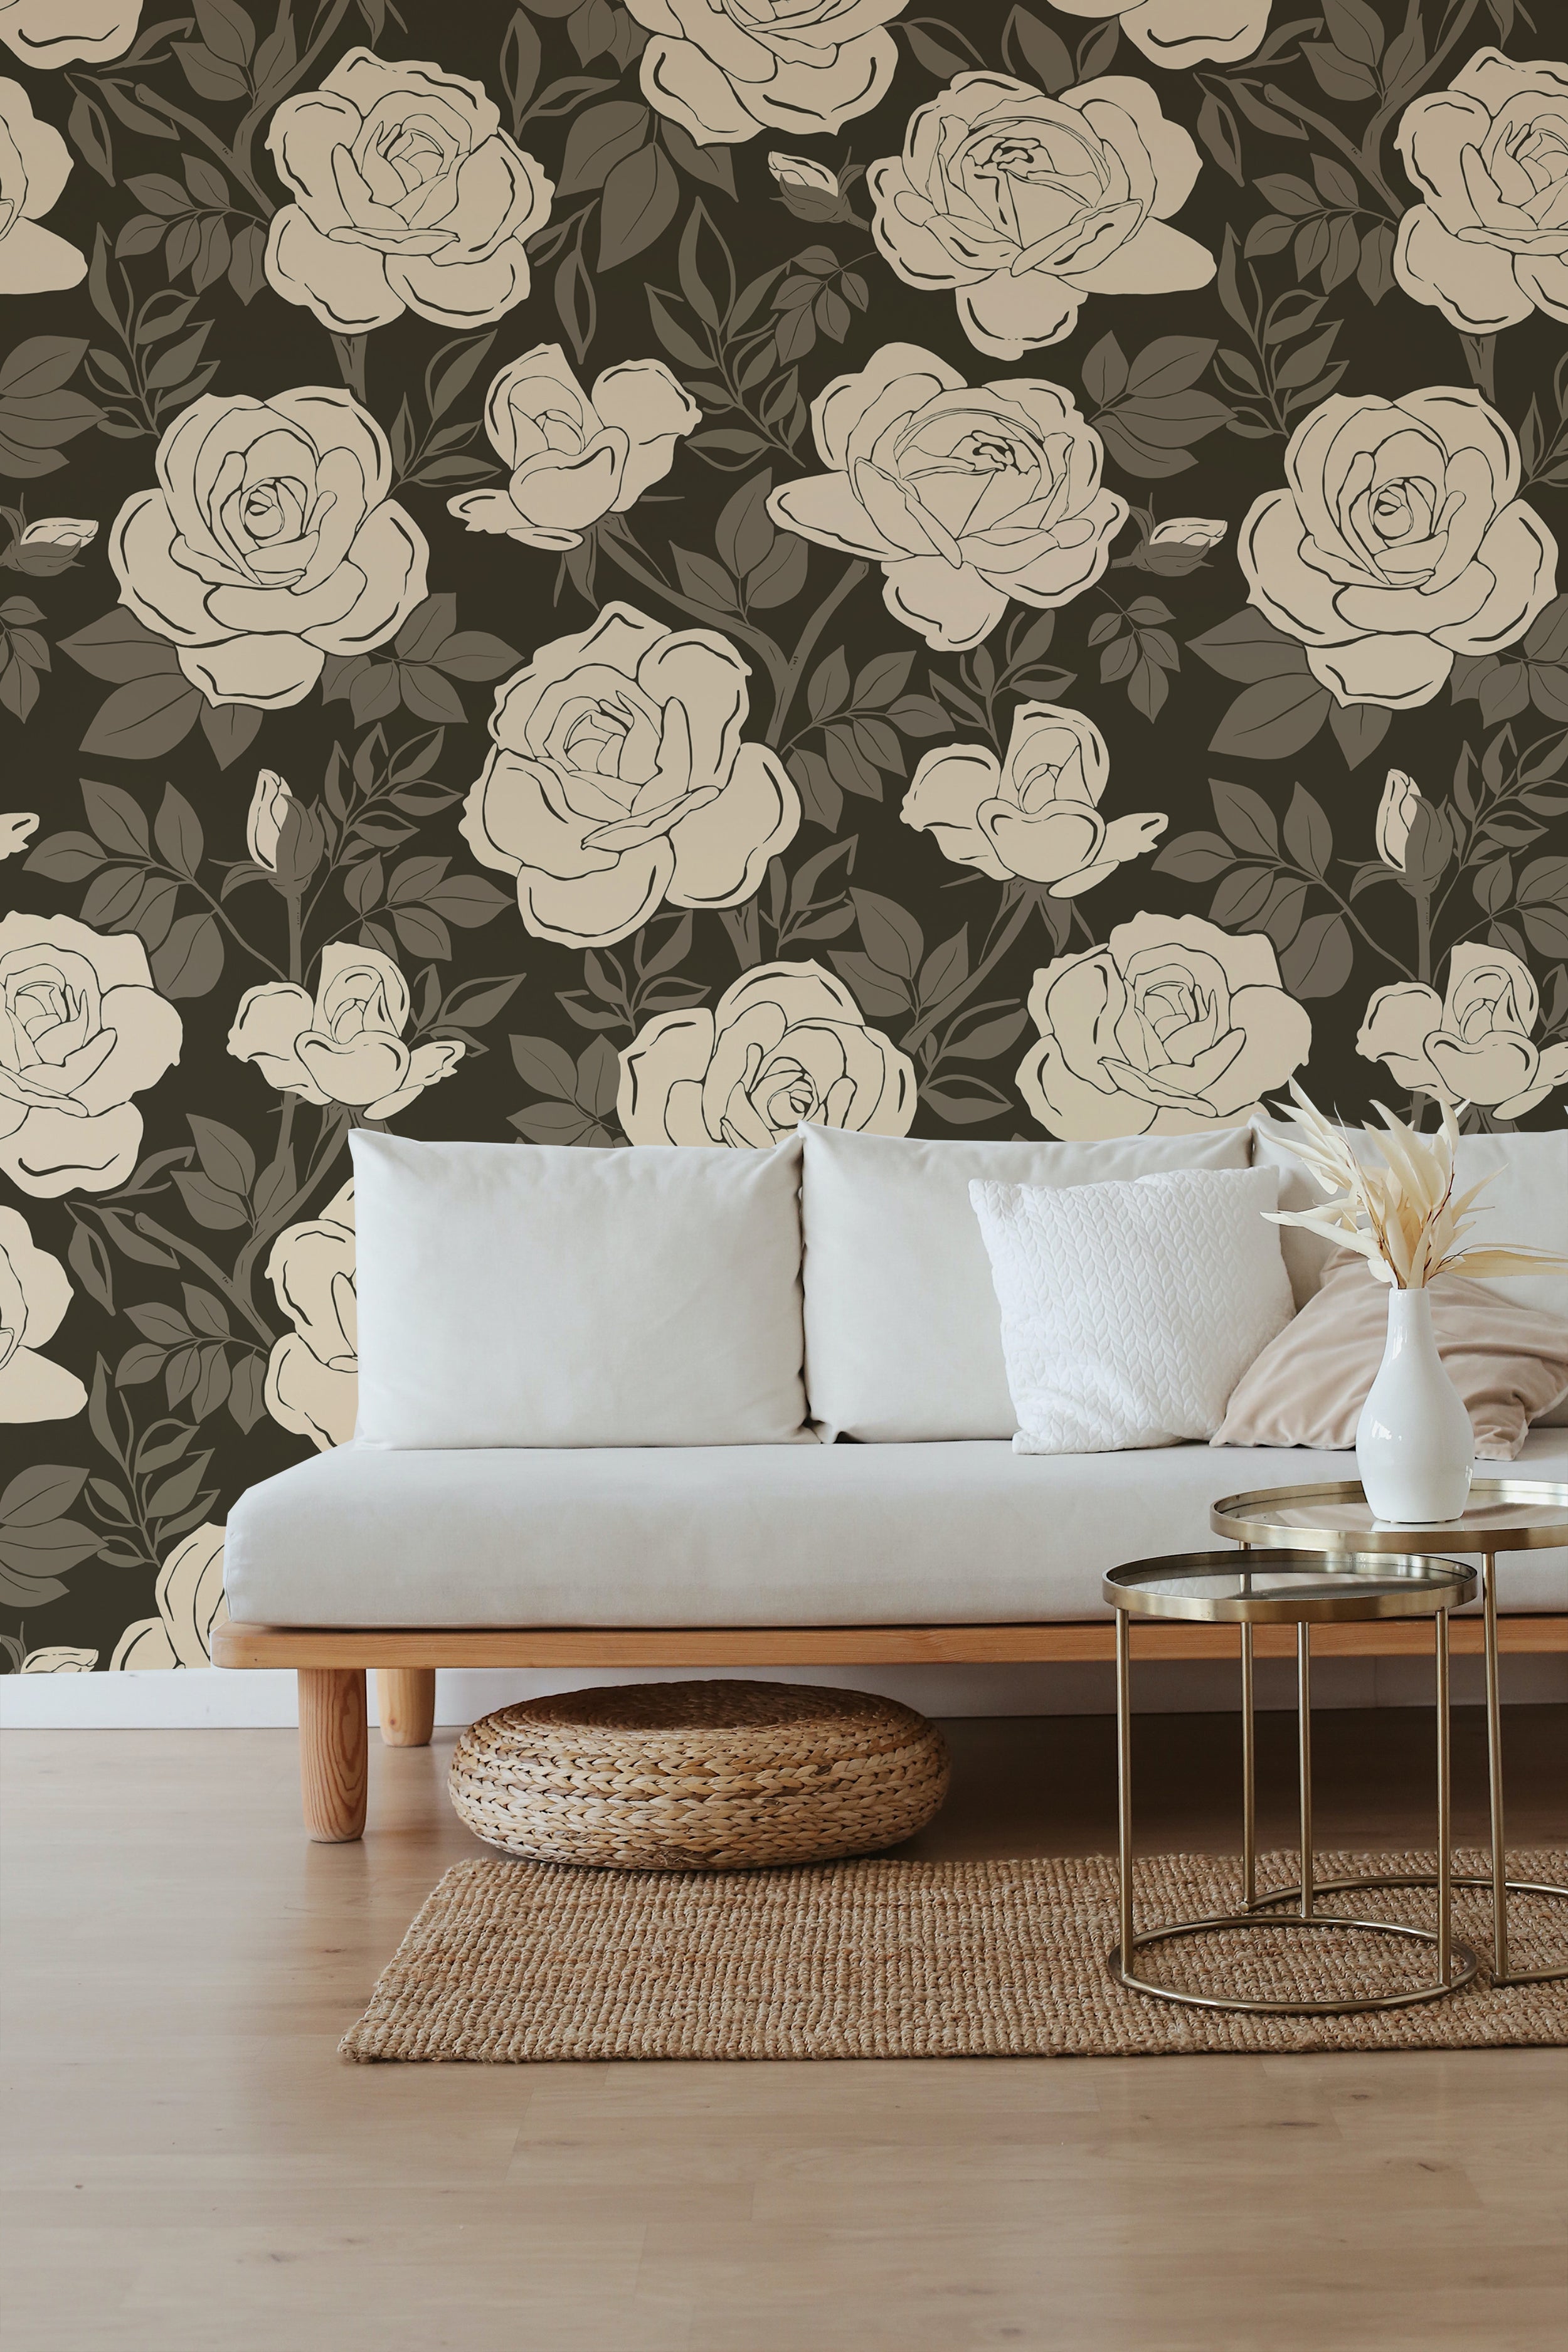 Chic, minimalist lounge area adorned with a floral wallpaper showcasing large cream roses on a dark background. The setting includes a light gray sofa, a natural wood coffee table, and a woven floor pouf, emphasizing a clean and tranquil space